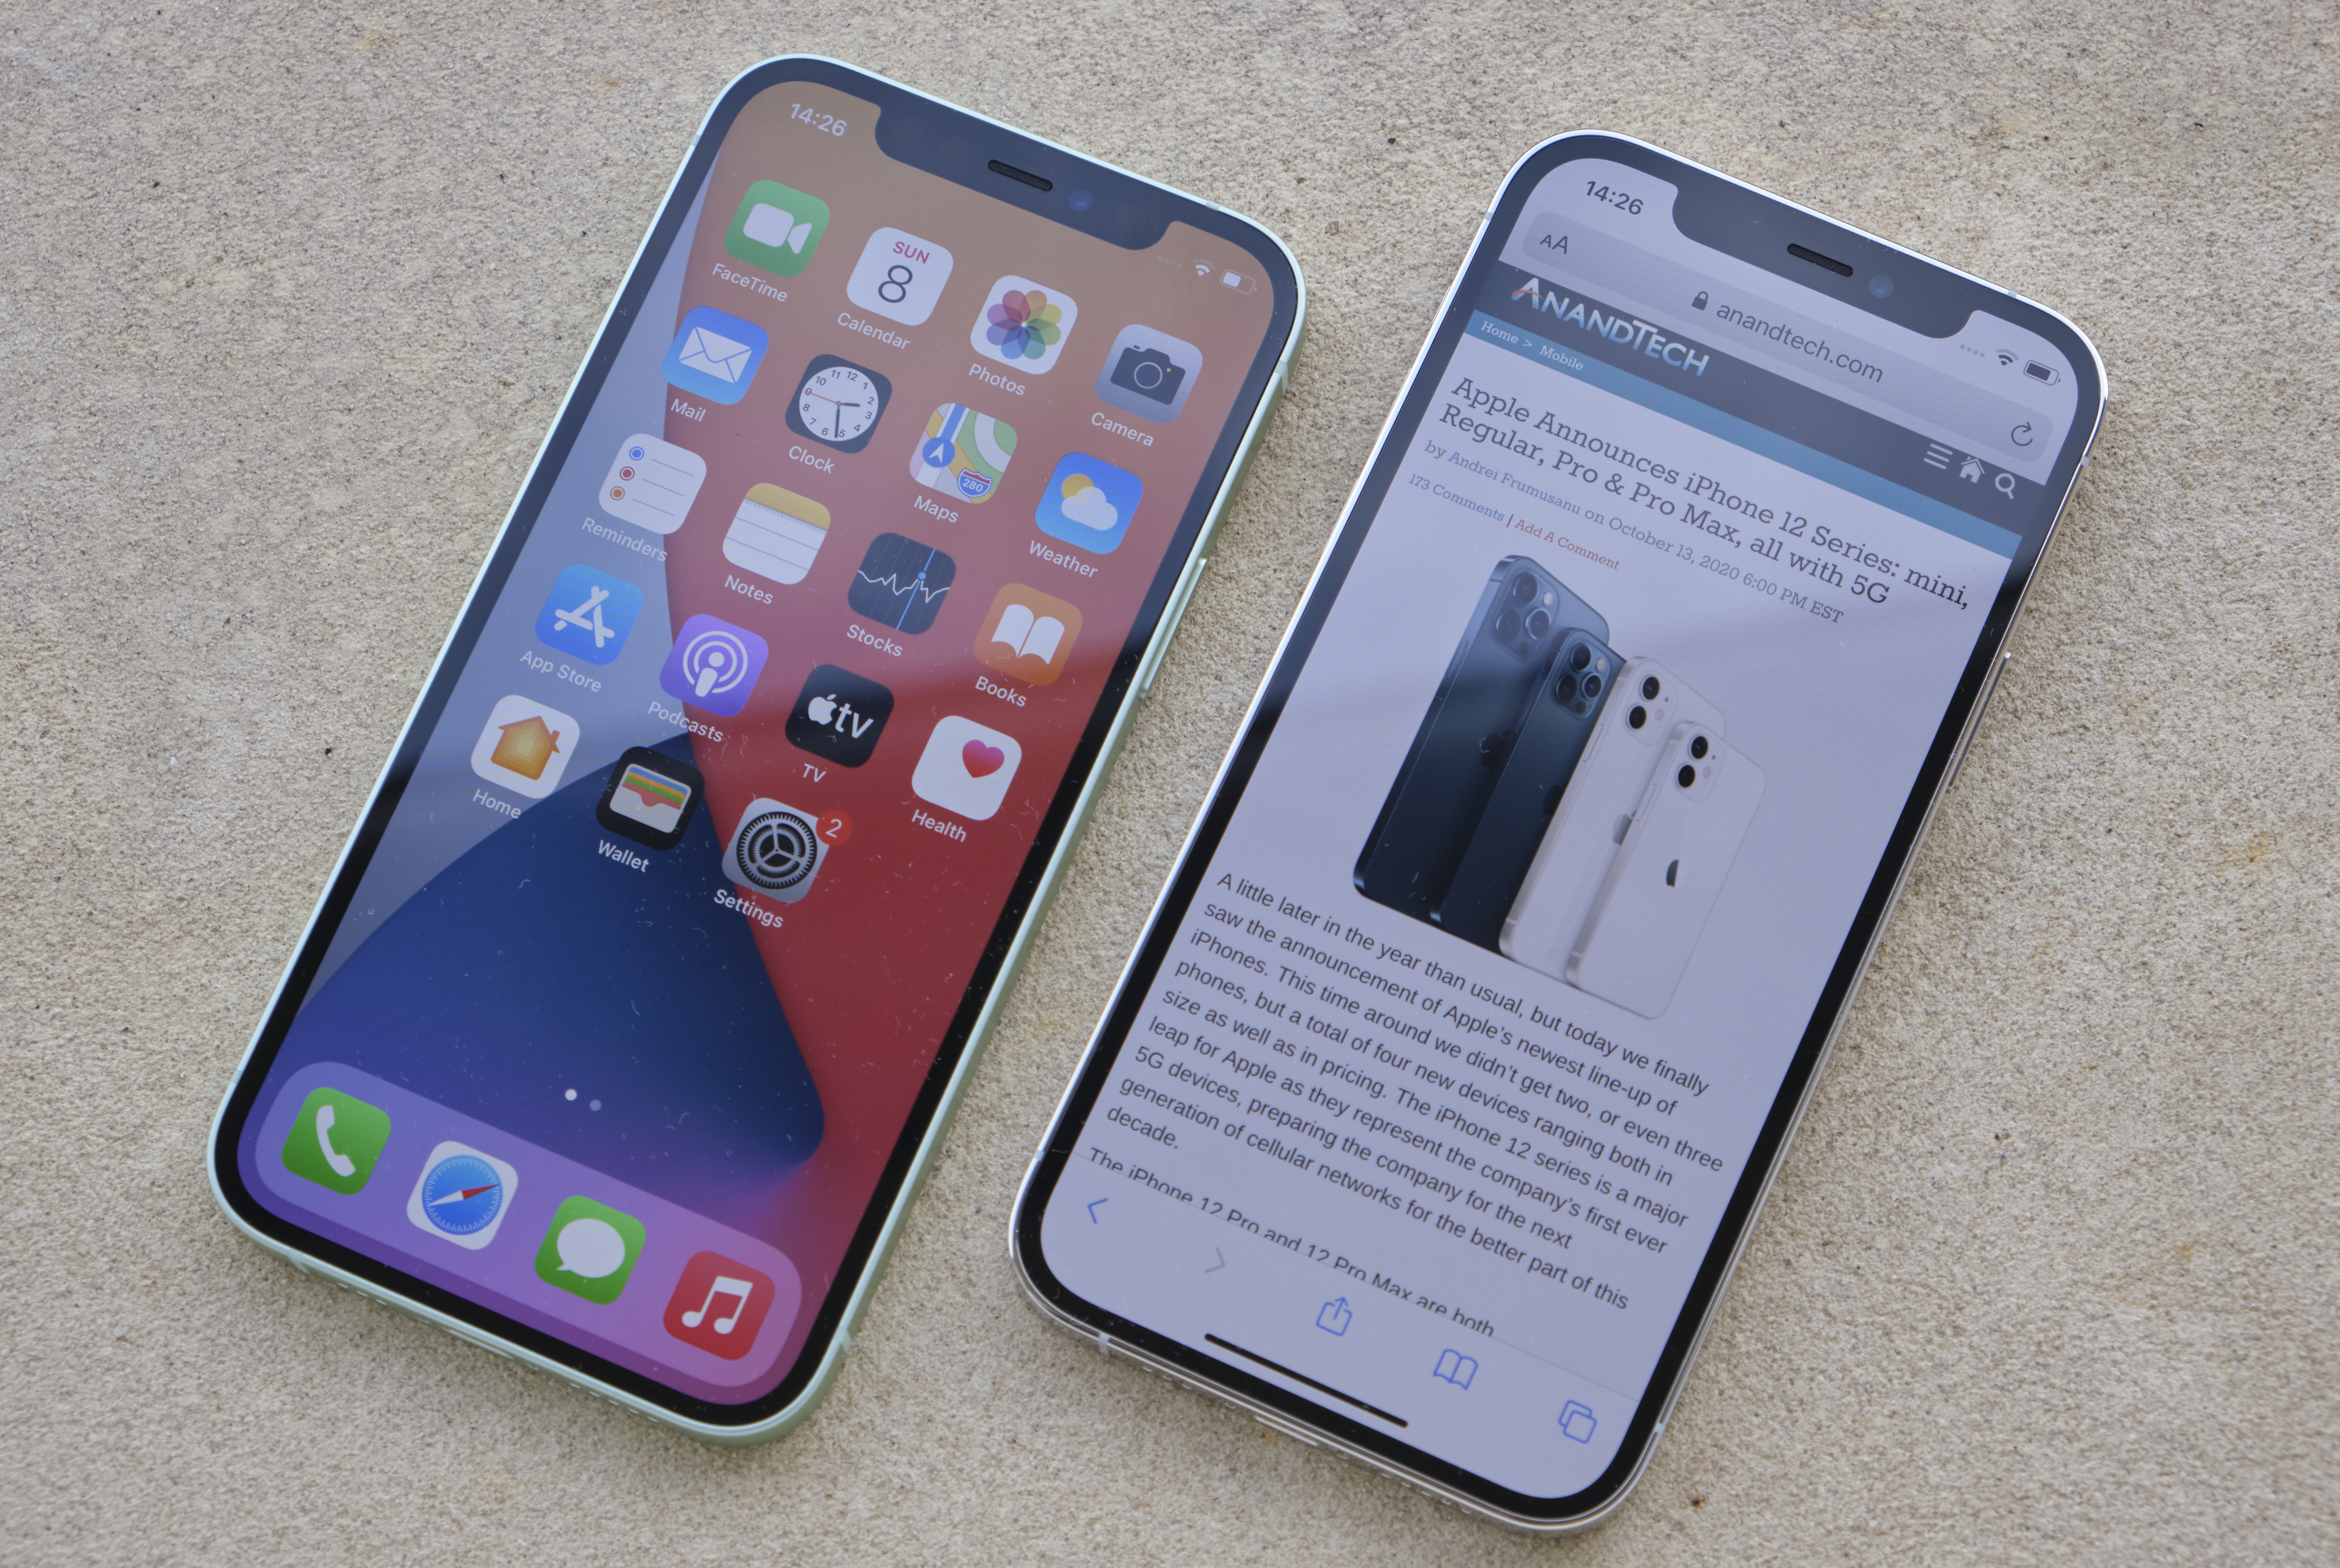 iPhone 12 Pro and iPhone 12 Pro Max 2 Years Later! 